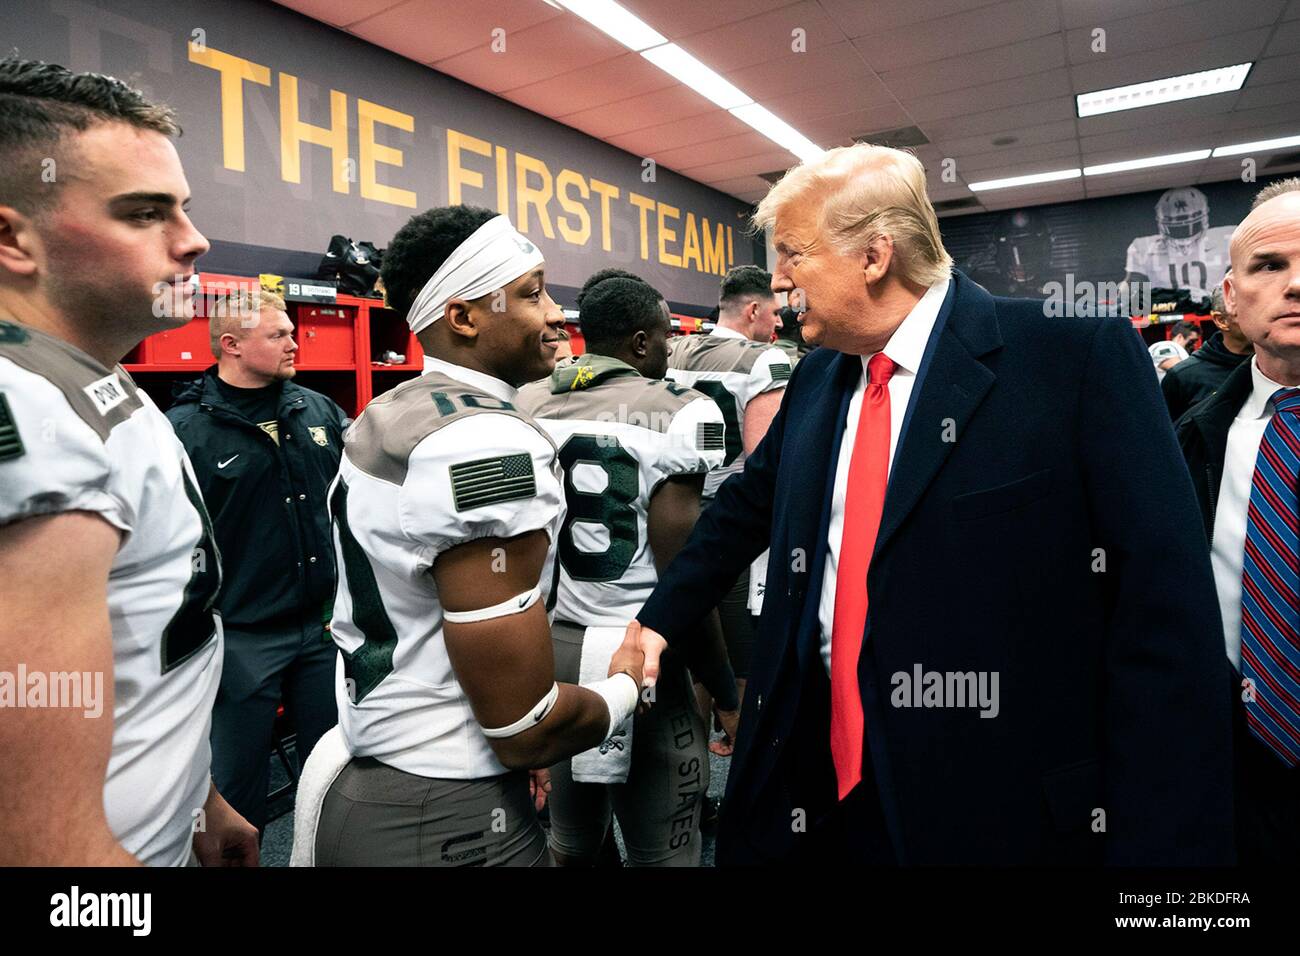 President Donald J. Trump, joined by Secretary of Defense Mark Esper, meets  with members of the U.S. Army football team in their locker room prior to  the start of the 120th Army-Navy